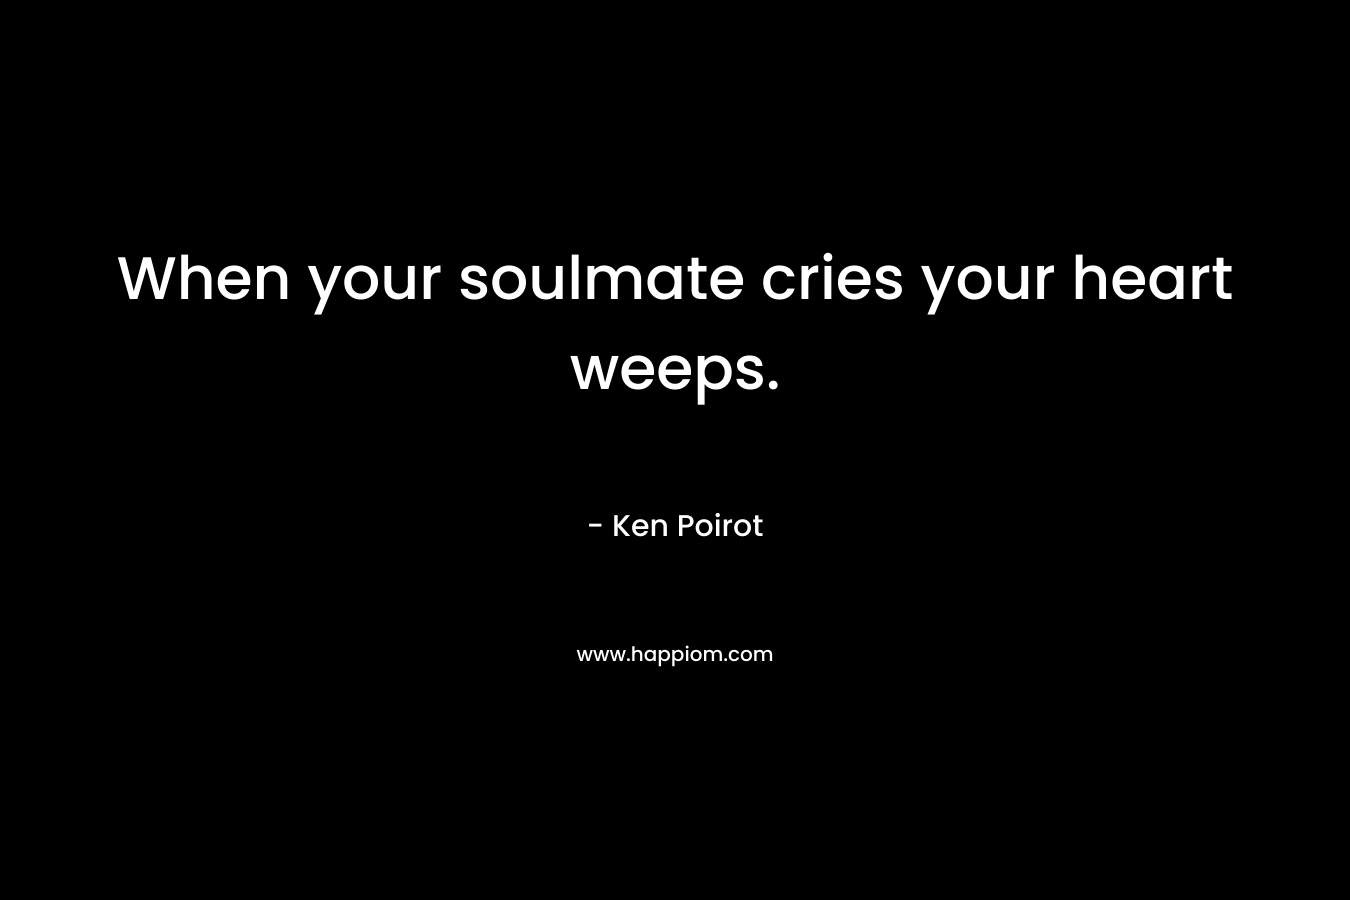 When your soulmate cries your heart weeps. – Ken Poirot